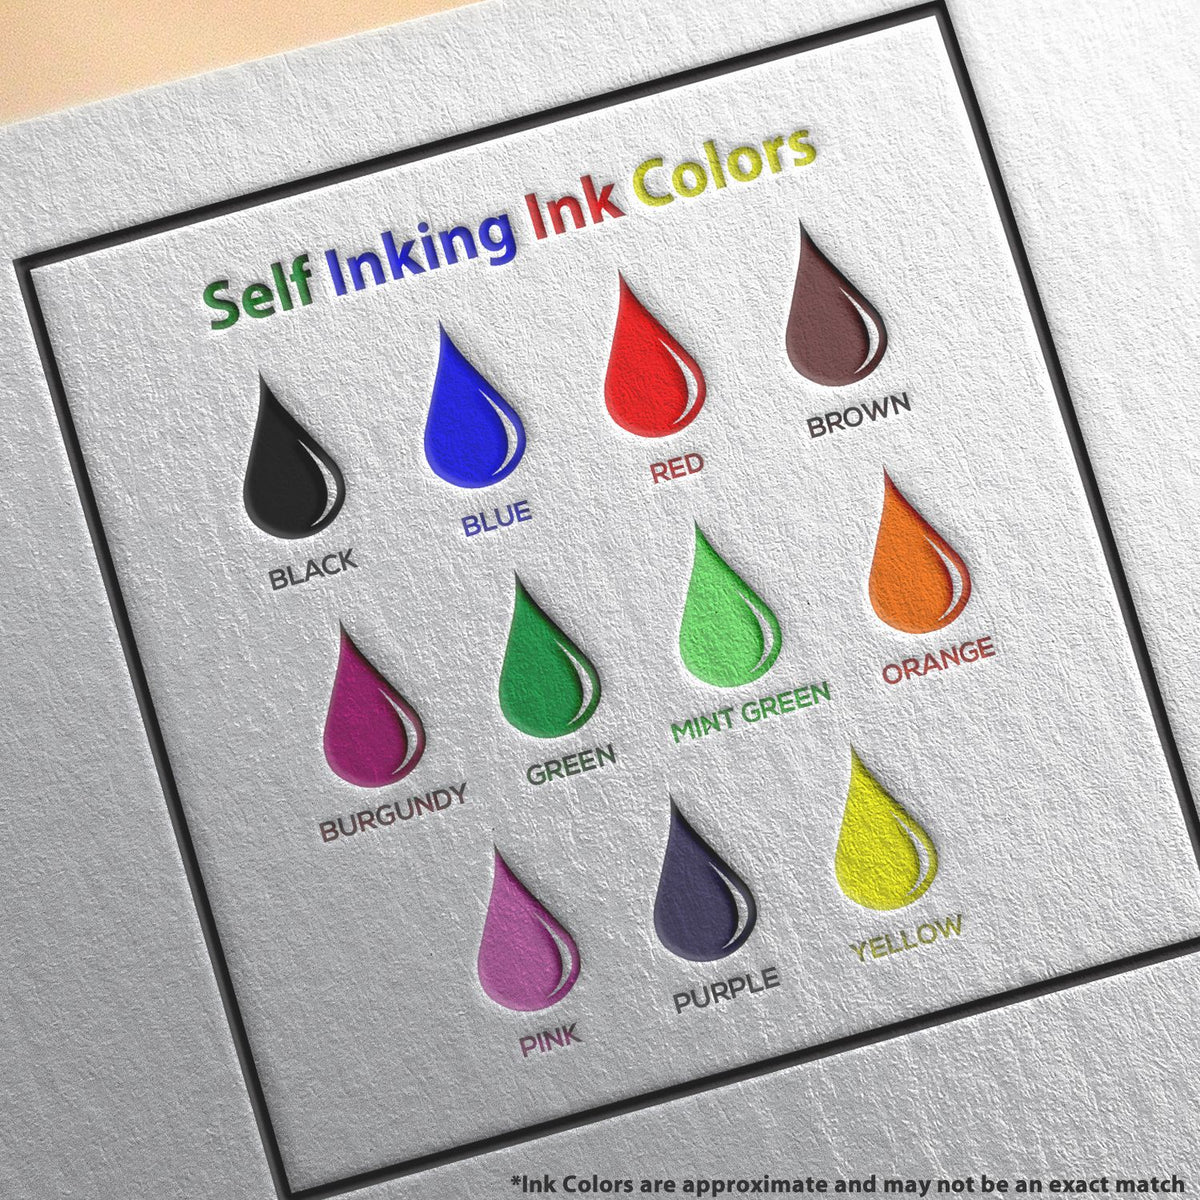 A picture showing the different ink colors or hues available for the Self-Inking Hawaii PE Stamp product.